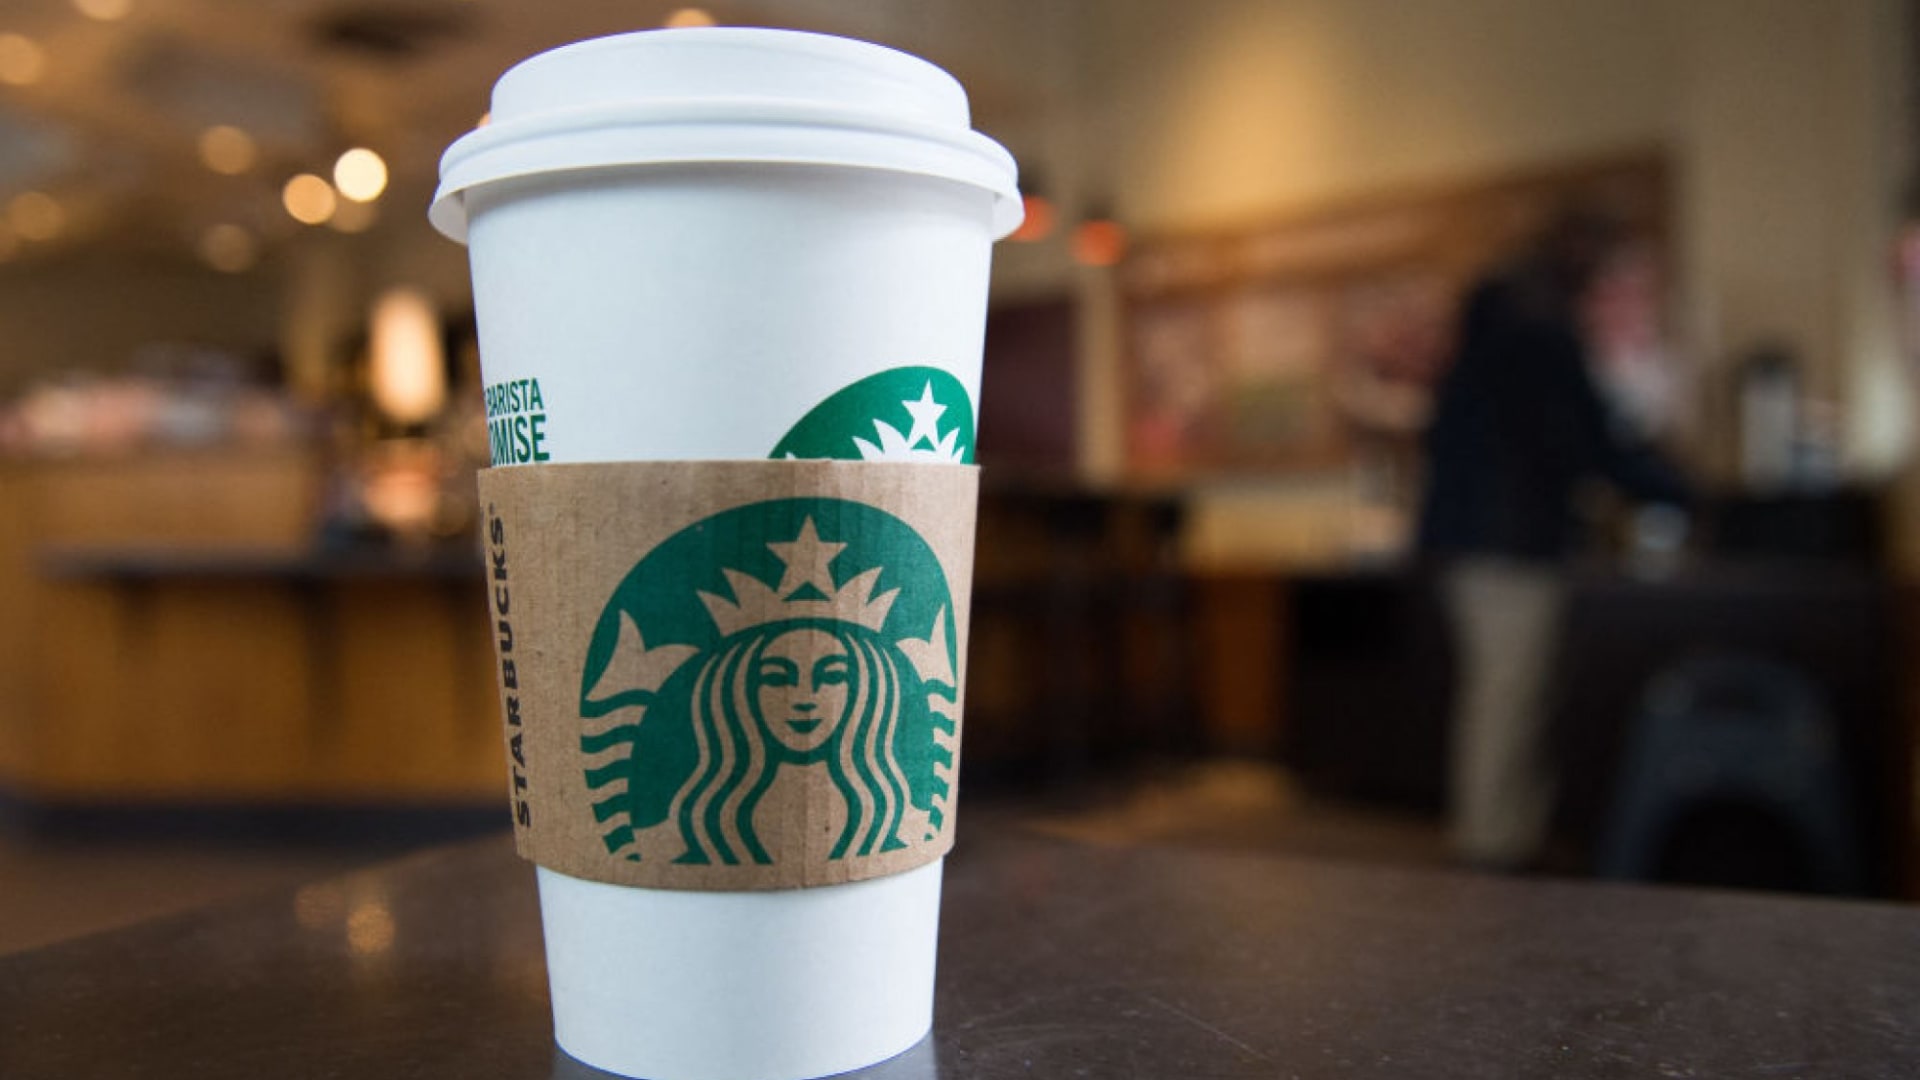 Starbucks Just Made a Huge Announcement That Will Completely Change the Way It Does Business. You'll Either Love It or Hate It